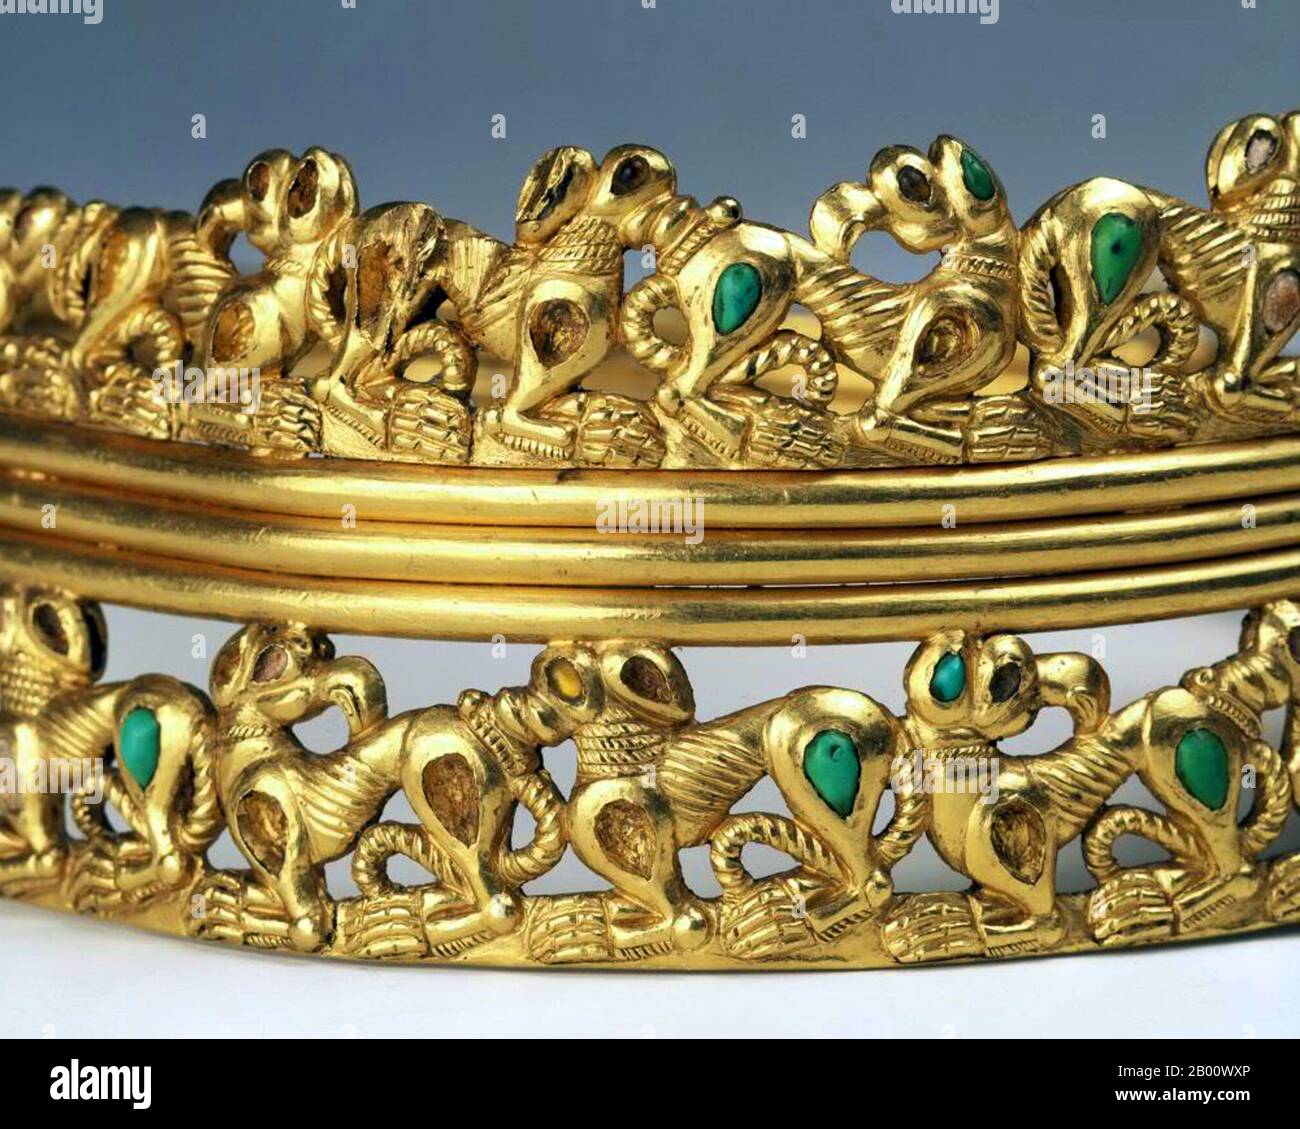 sarmatian-golden-neck-circlet-1st-century-ce-studded-with-turquoise-coral-and-glass-from-the-chochlatch-kurgan-novocherkask-image-released-to-the-press-in-2009-the-scythians-were-an-ancient-iranian-people-of-horse-riding-nomadic-pastoralists-who-throughout-classical-antiquity-dominated-the-pontic-caspian-steppe-known-at-the-time-as-scythia-by-late-antiquity-the-closely-related-sarmatians-came-to-dominate-the-scythians-in-the-west-2B00WXP.jpg